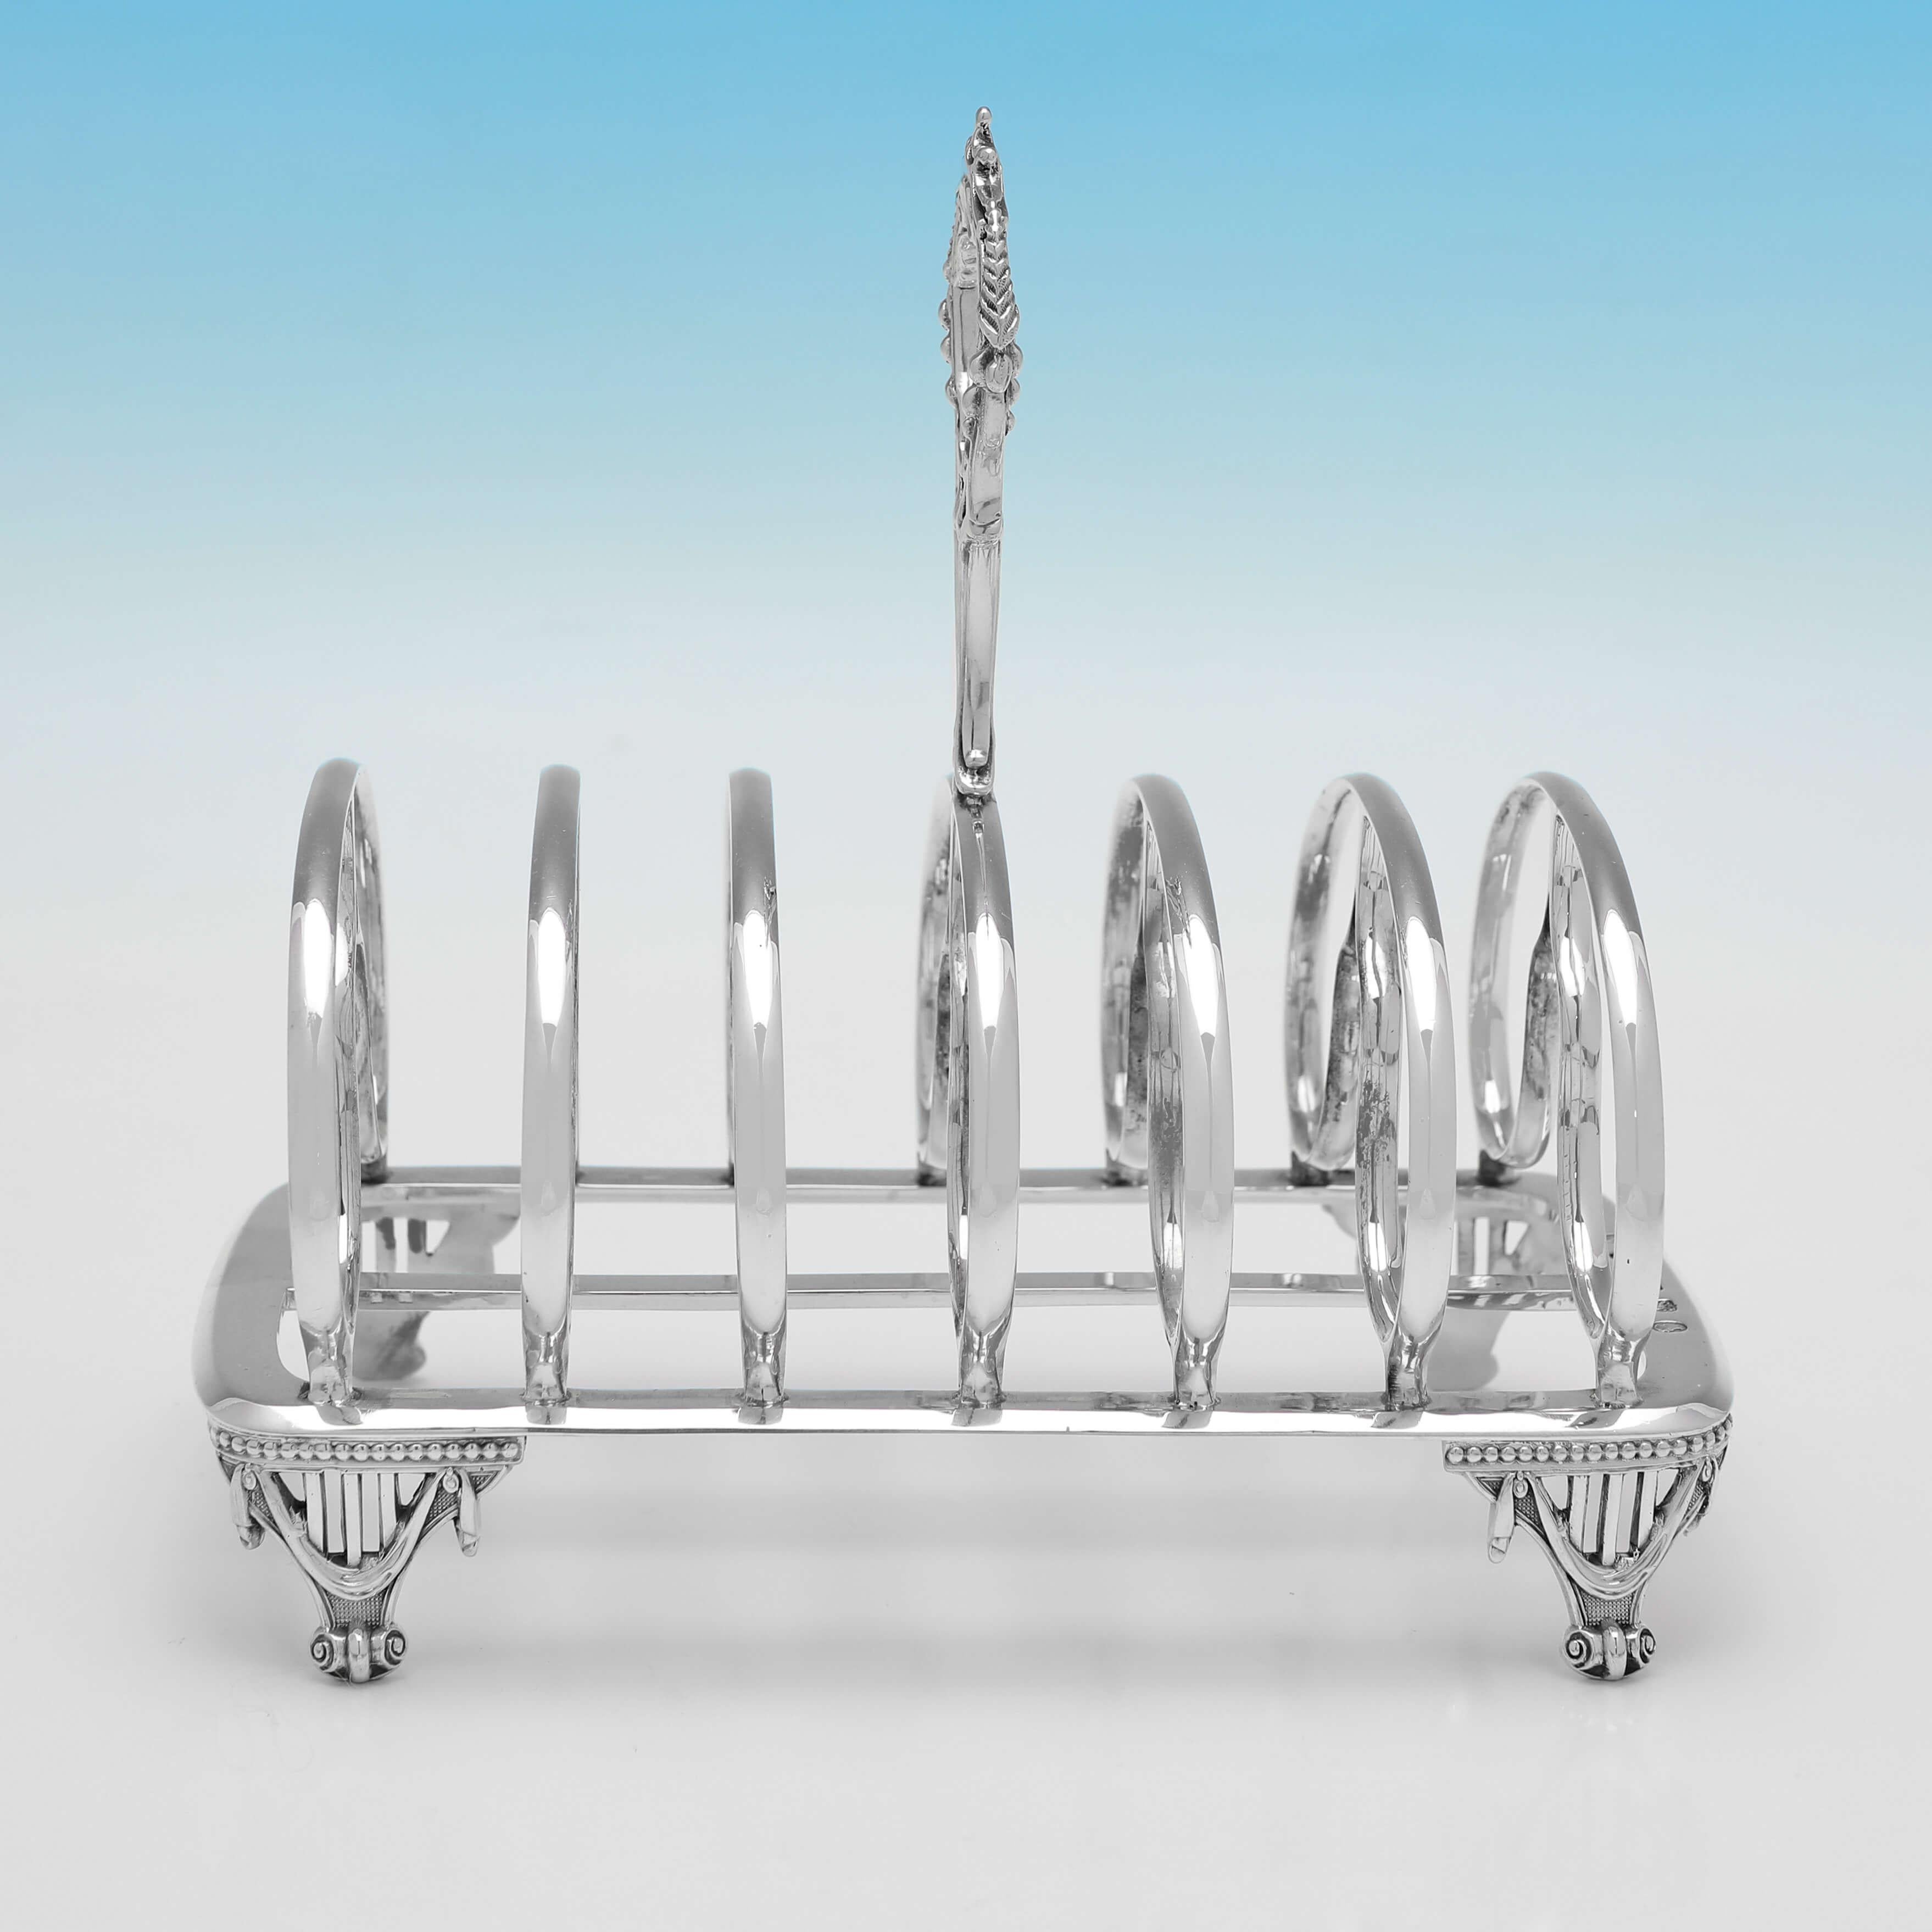 Hallmarked in Birmingham in 1862 by Elkington & Co., this attractive, Victorian, Antique Sterling Silver Toast Rack, is ornate in design, with a cast neoclassical handle and 4 feet, and will hold 6 pieces of toast. 

The toast rack measures